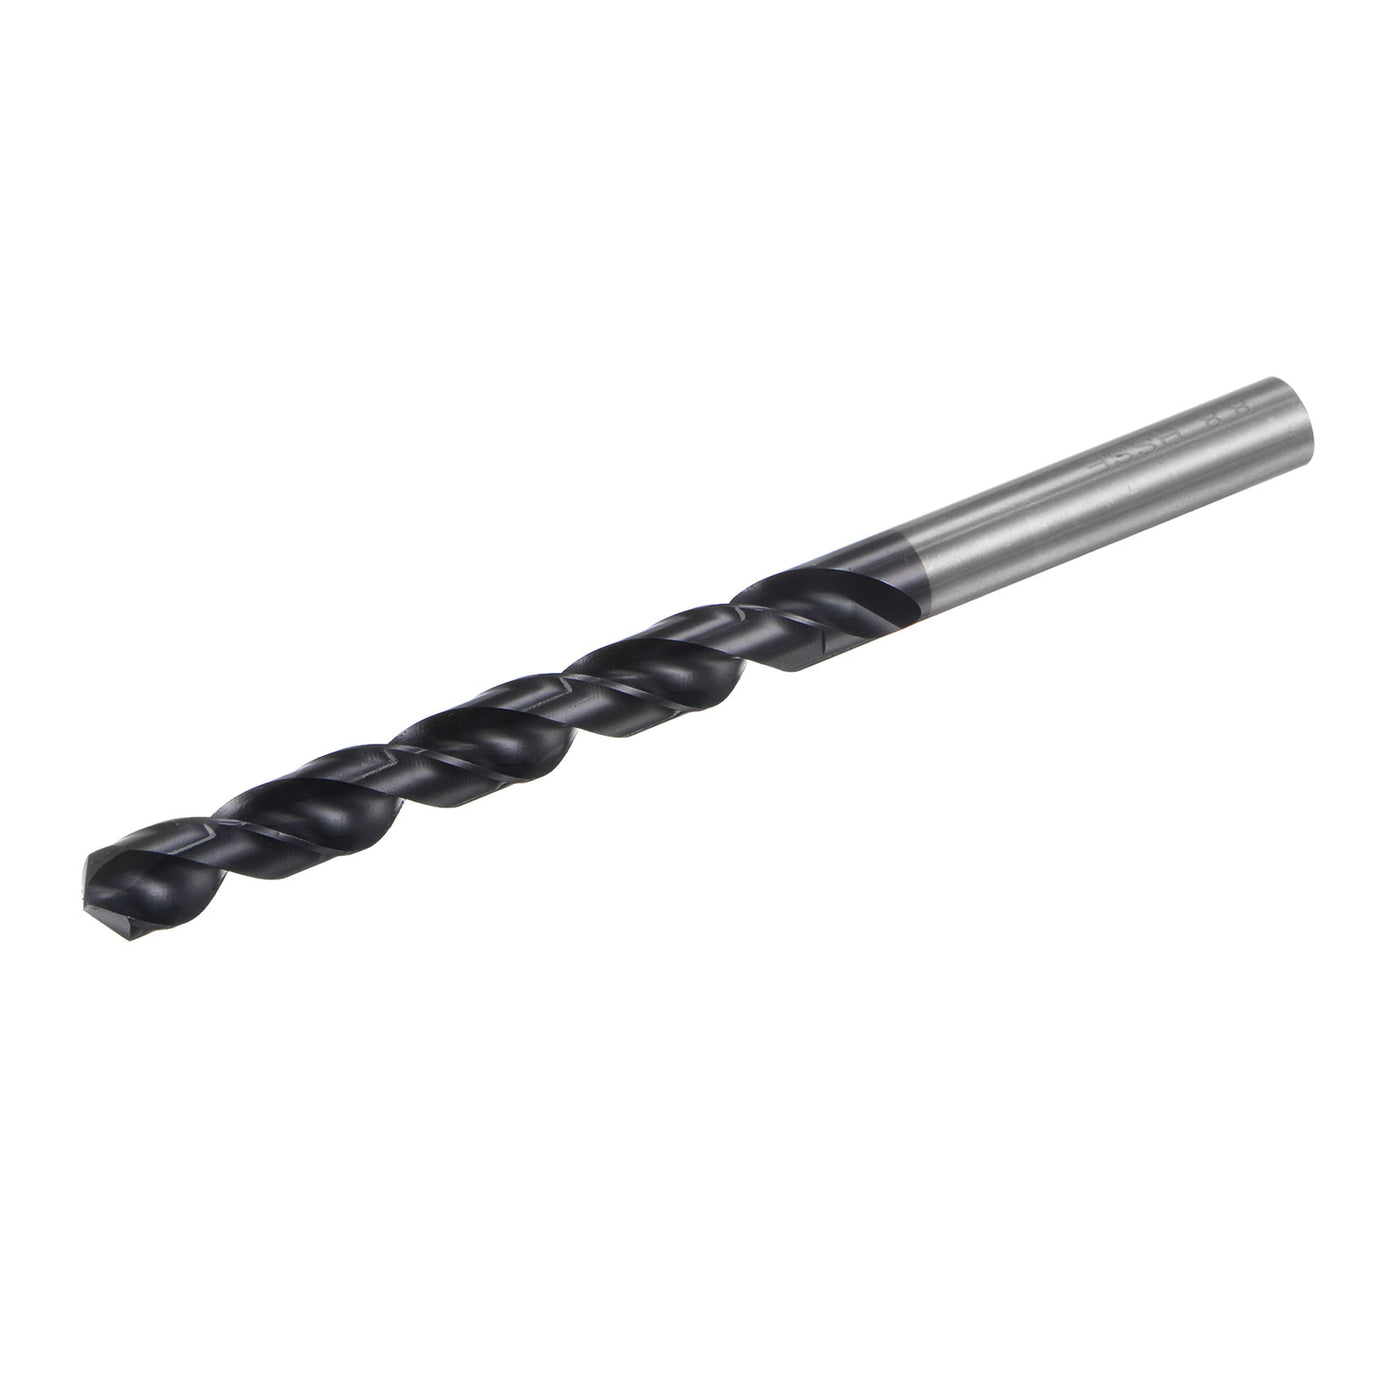 uxcell Uxcell 8.8mm M42 High Speed Steel Twist Drill Bits, TiCN Coated Round Shank Drill Bit